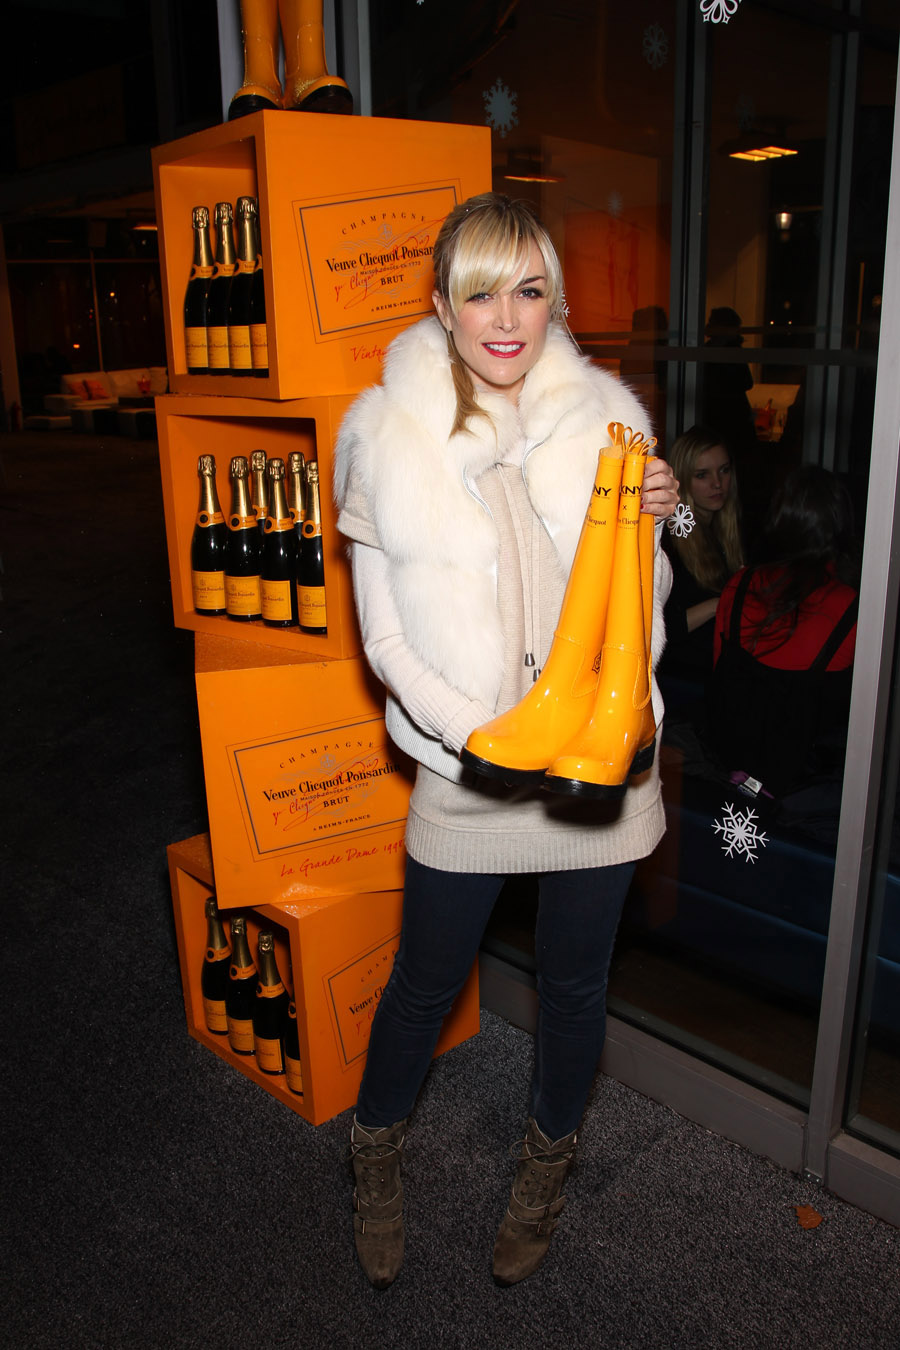 Veuve Clicquot in the Snow Bash Sends Away the Winter Blues